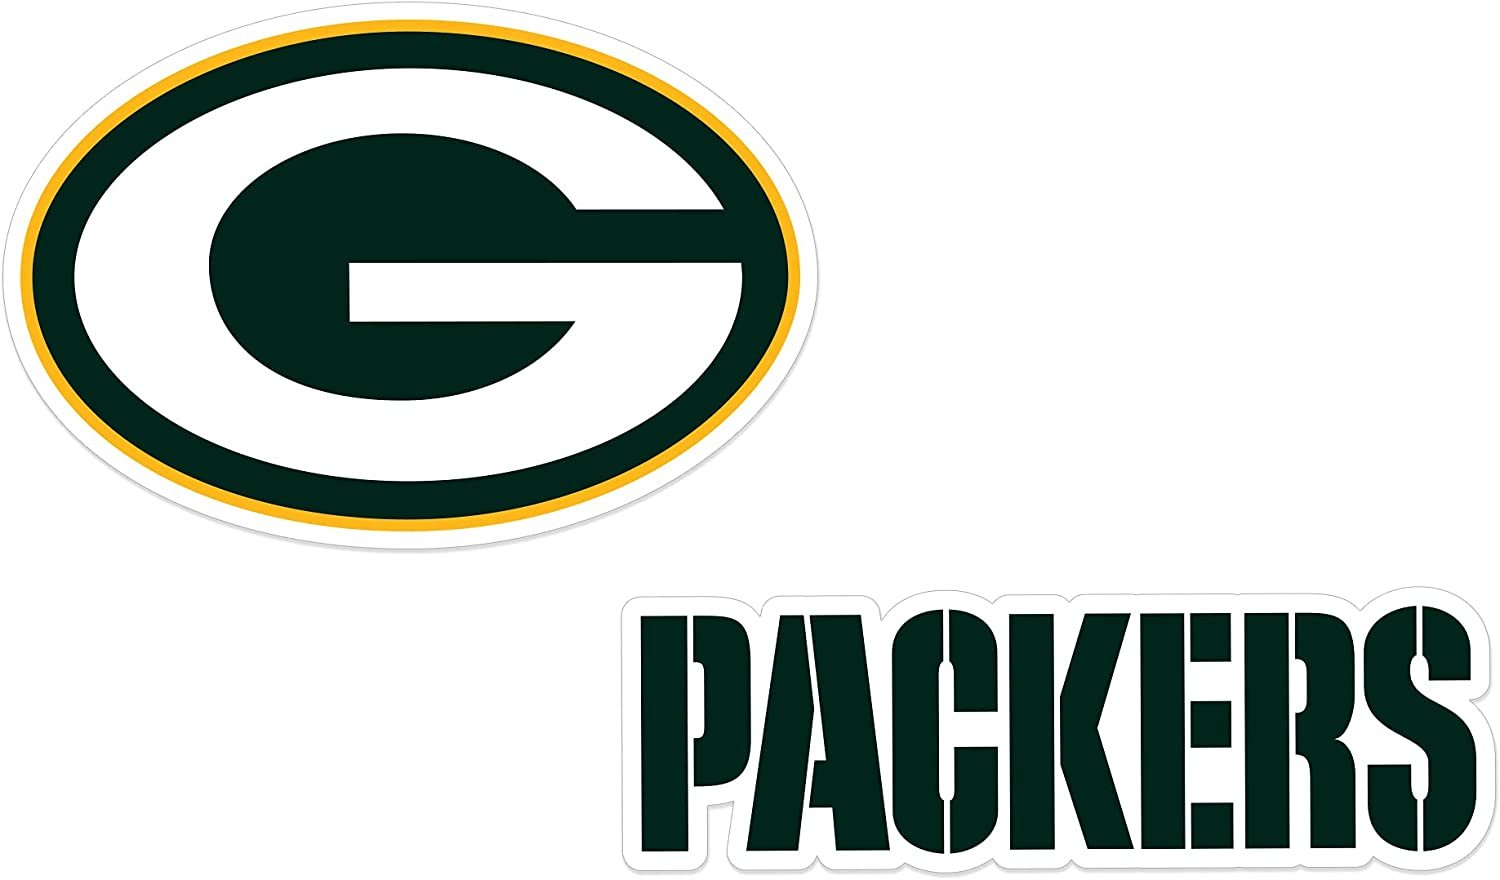 Green Bay Packers 2-Pack Die Cut Team Logo Magnet Set 4x6 Inches